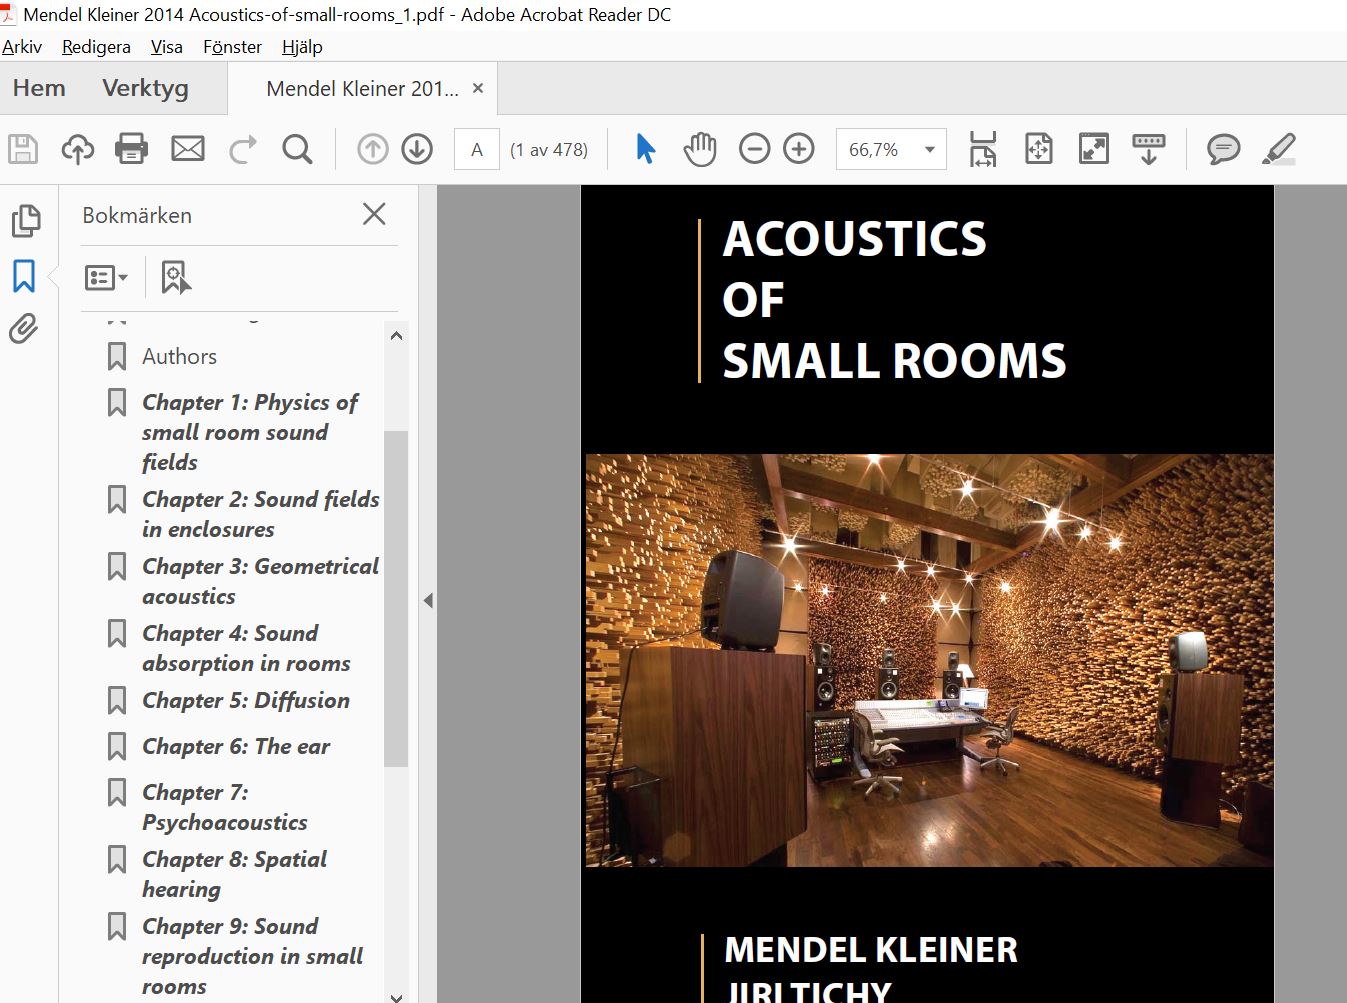 Acoustics of Small Rooms.JPG